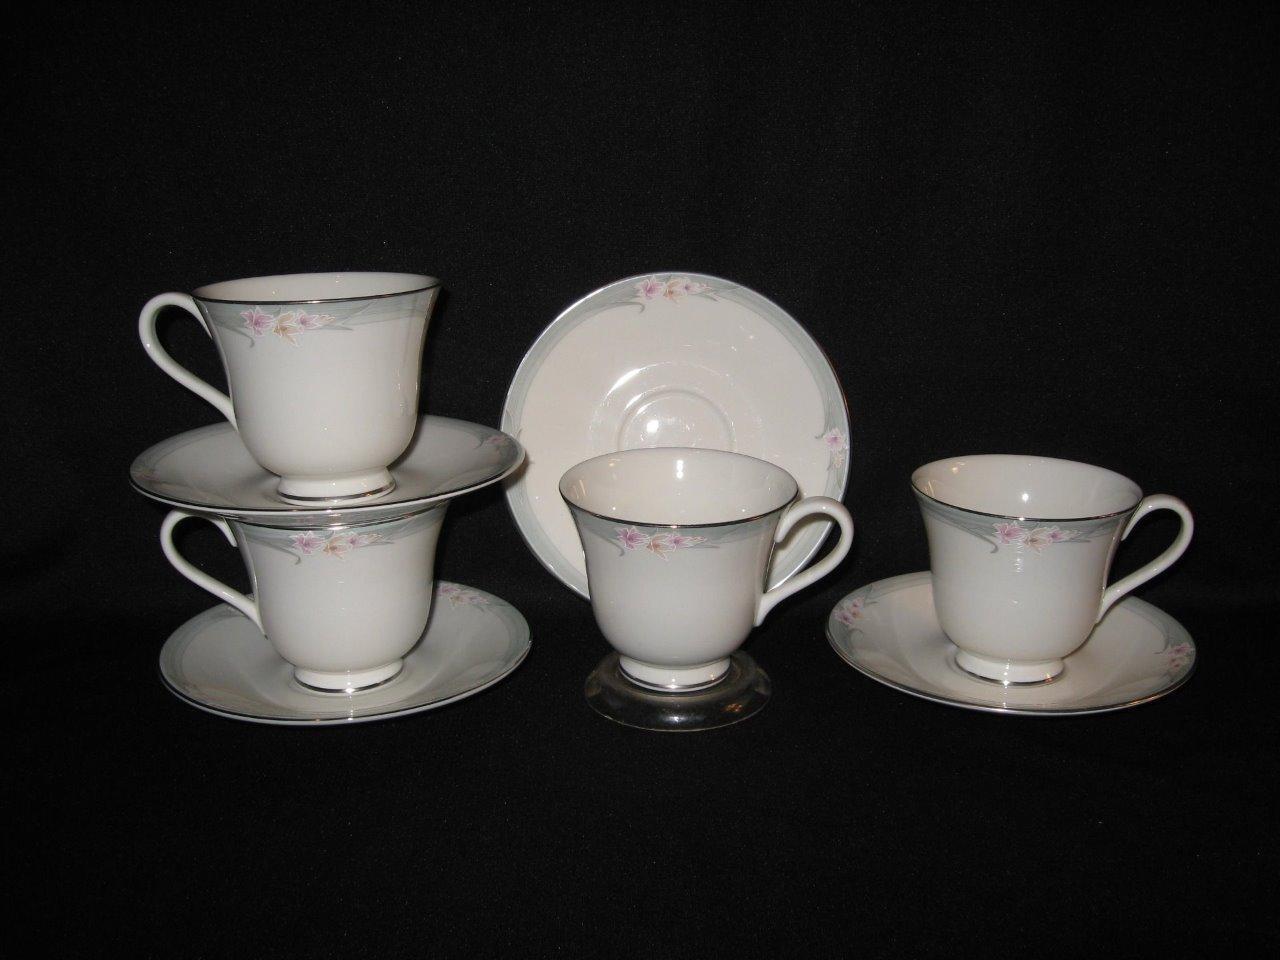 ROYAL DOULTON VOGUE COLLECTION SOPHISTICATION TC 1157 FOOTED CUPS & SAUCERS - 4